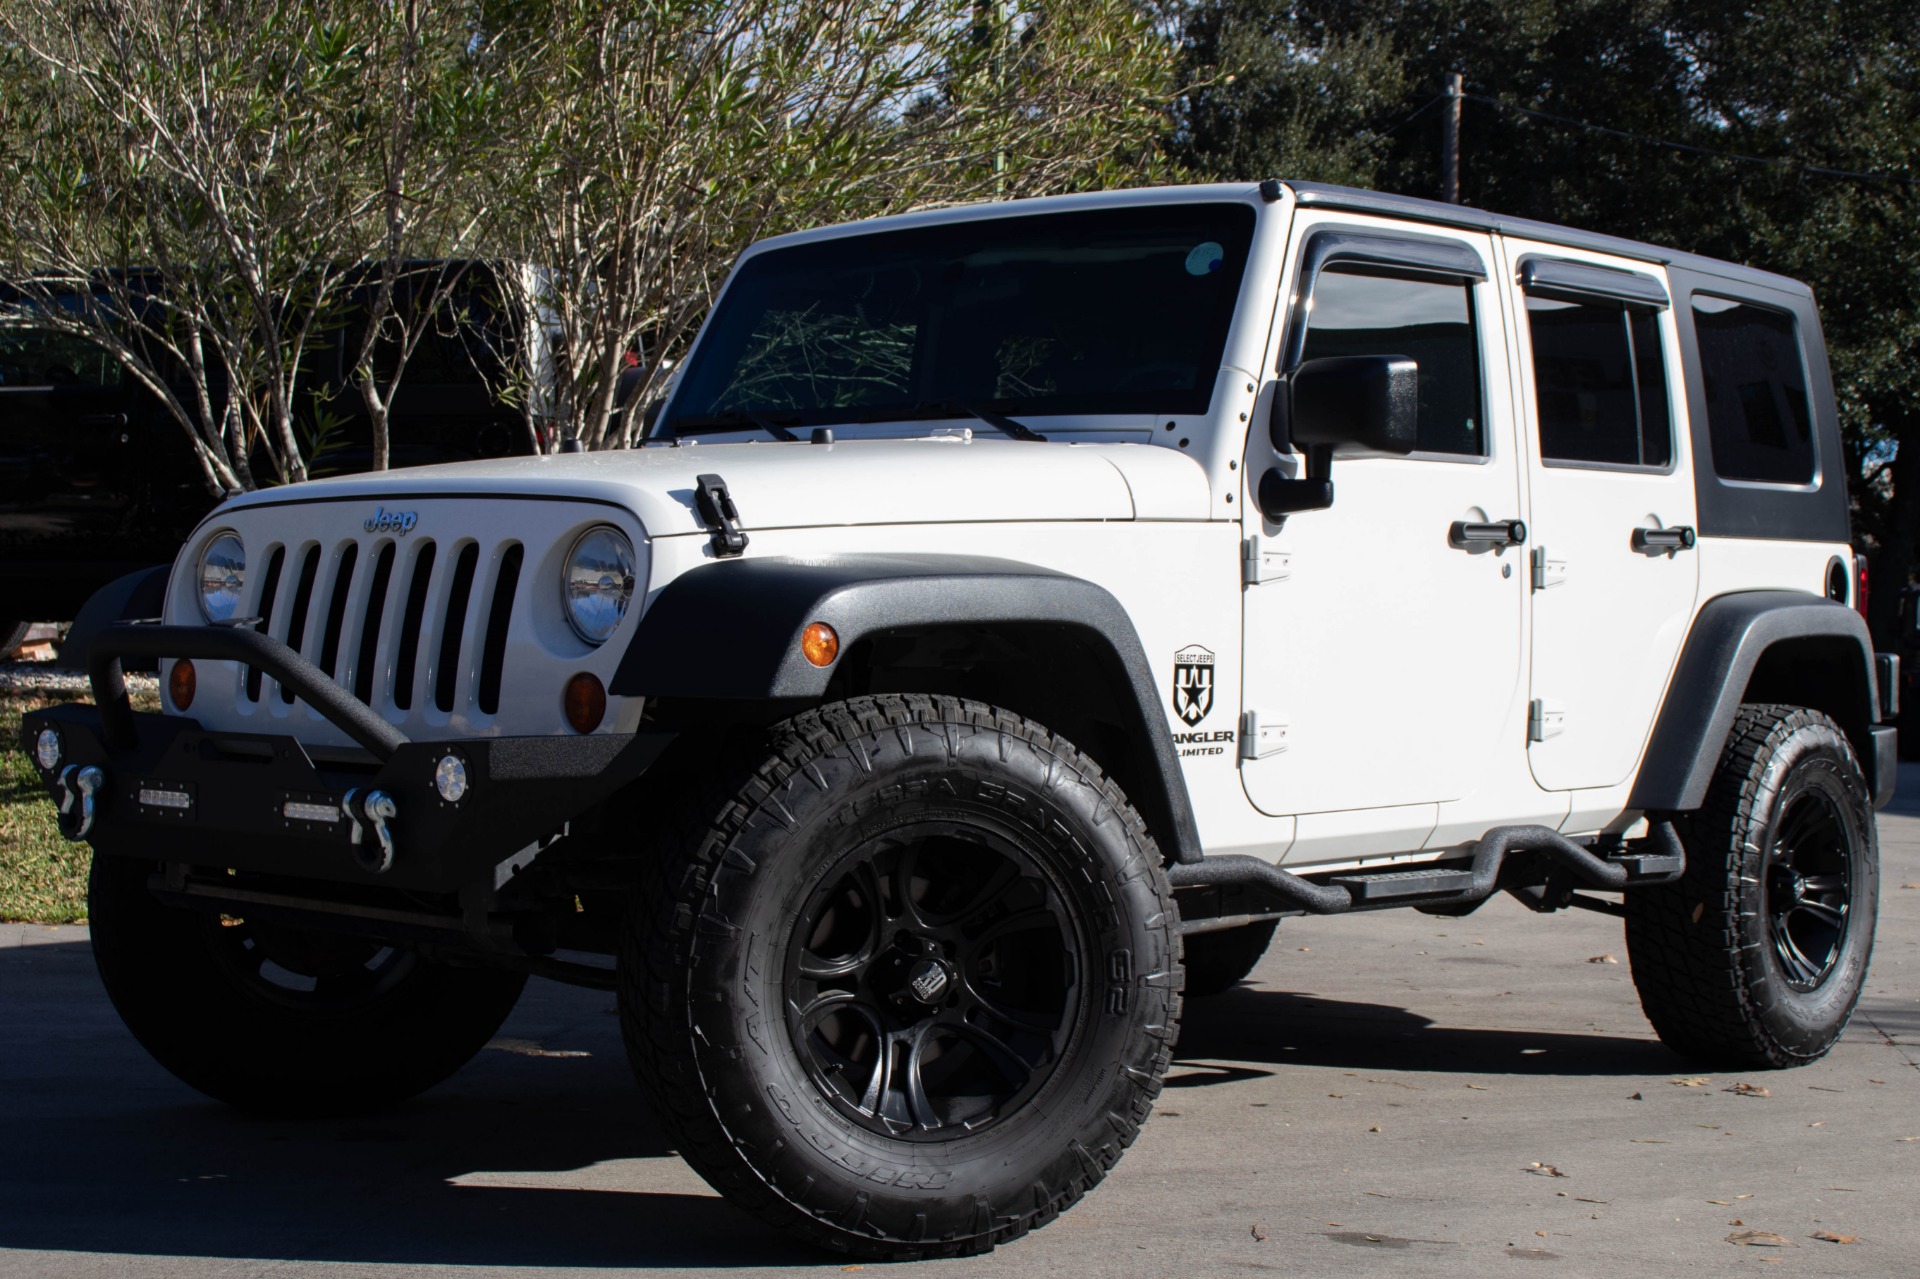 Used 2008 Jeep Wrangler Unlimited X For Sale ($18,995) | Select Jeeps Inc.  Stock #628156